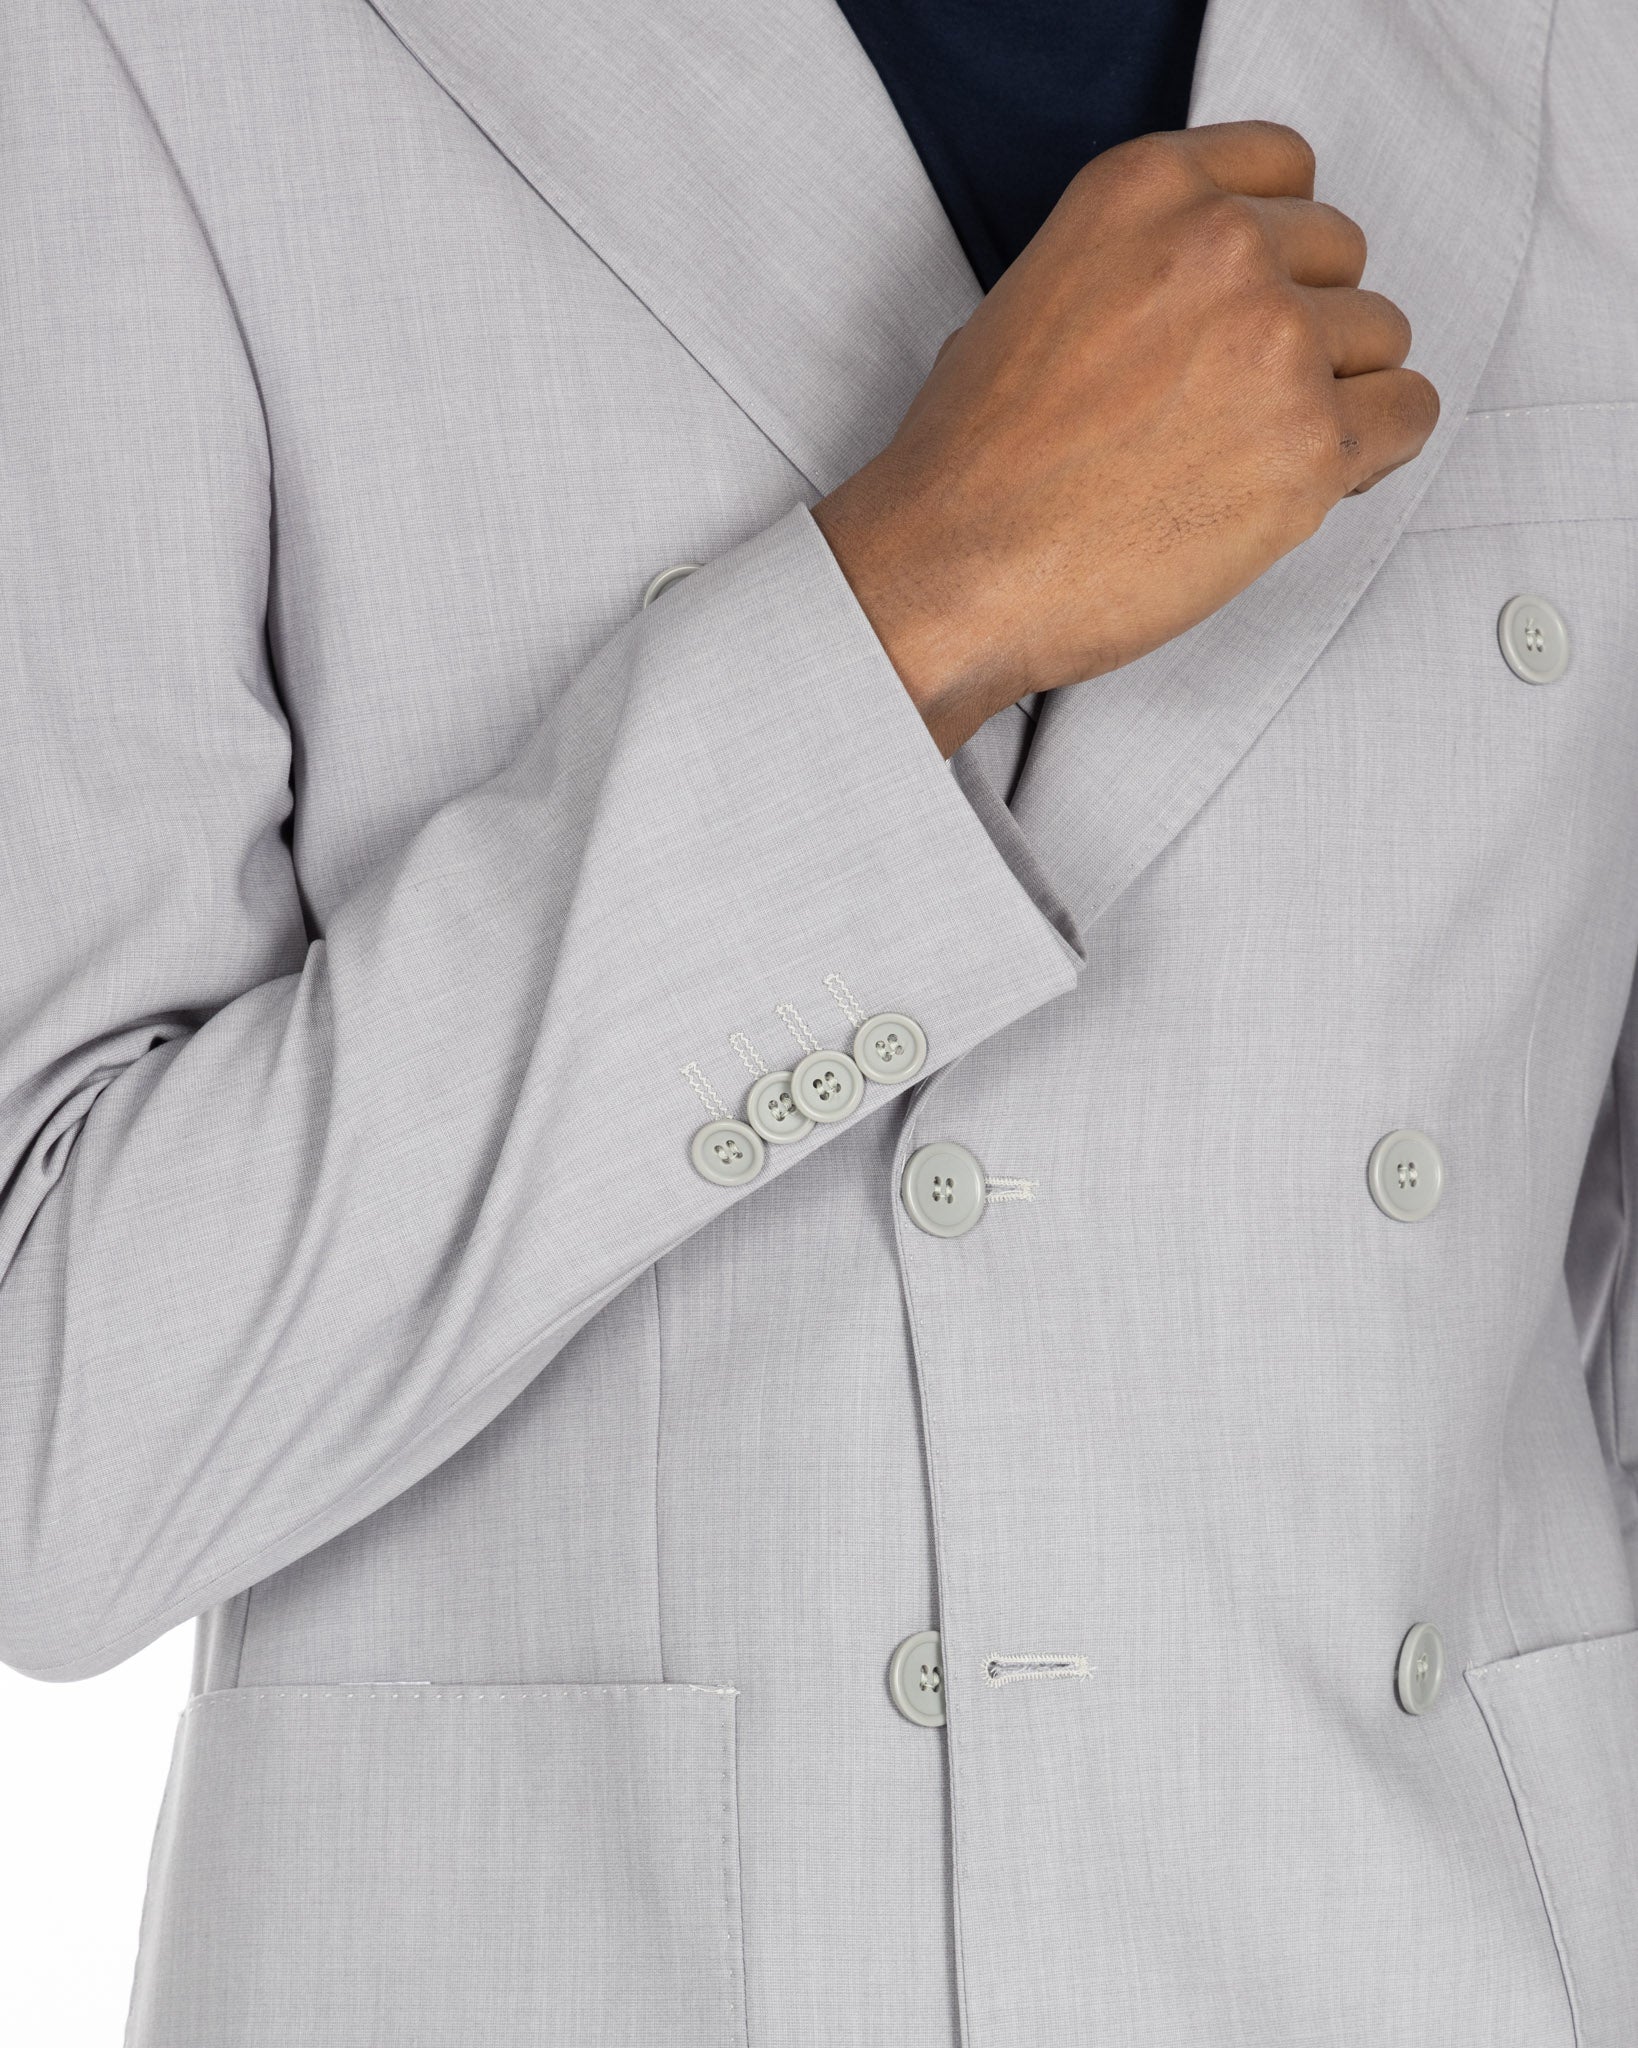 Monaco - gray double-breasted suit